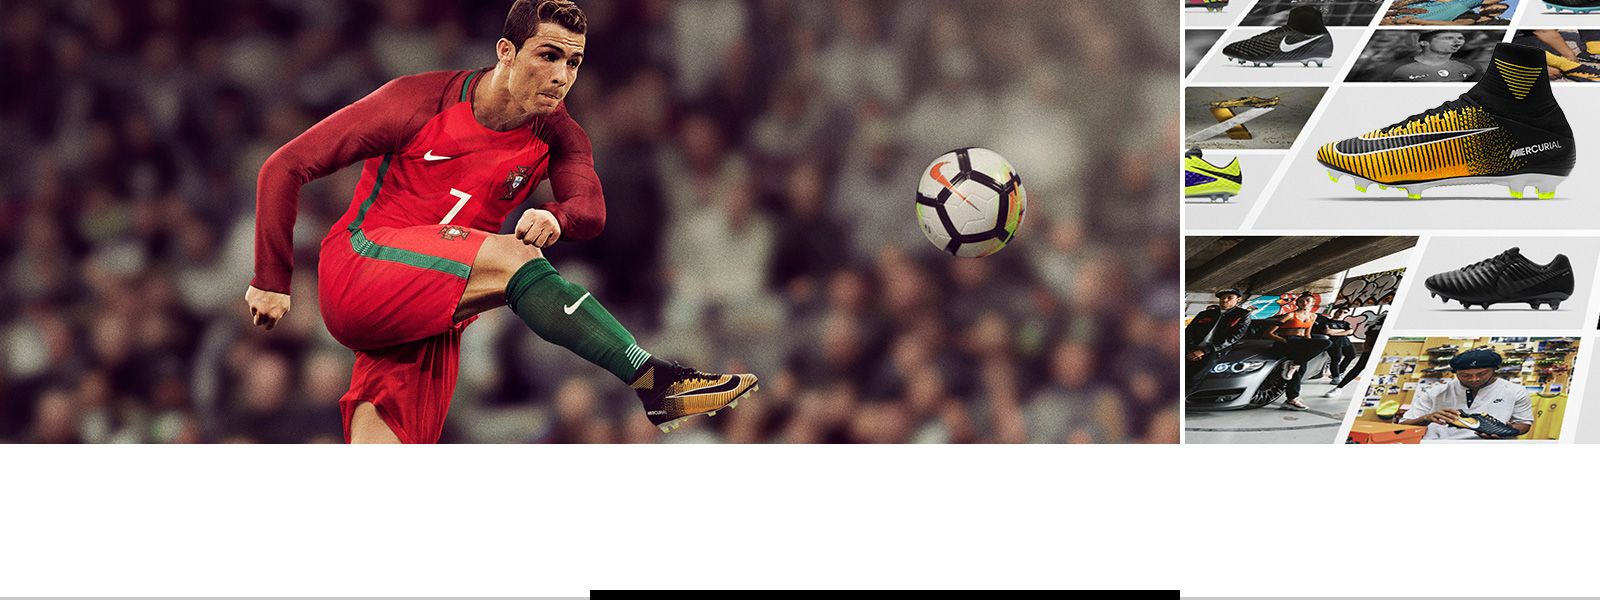 Nike Mercurial Superfly CR7 Melhor With images Superfly